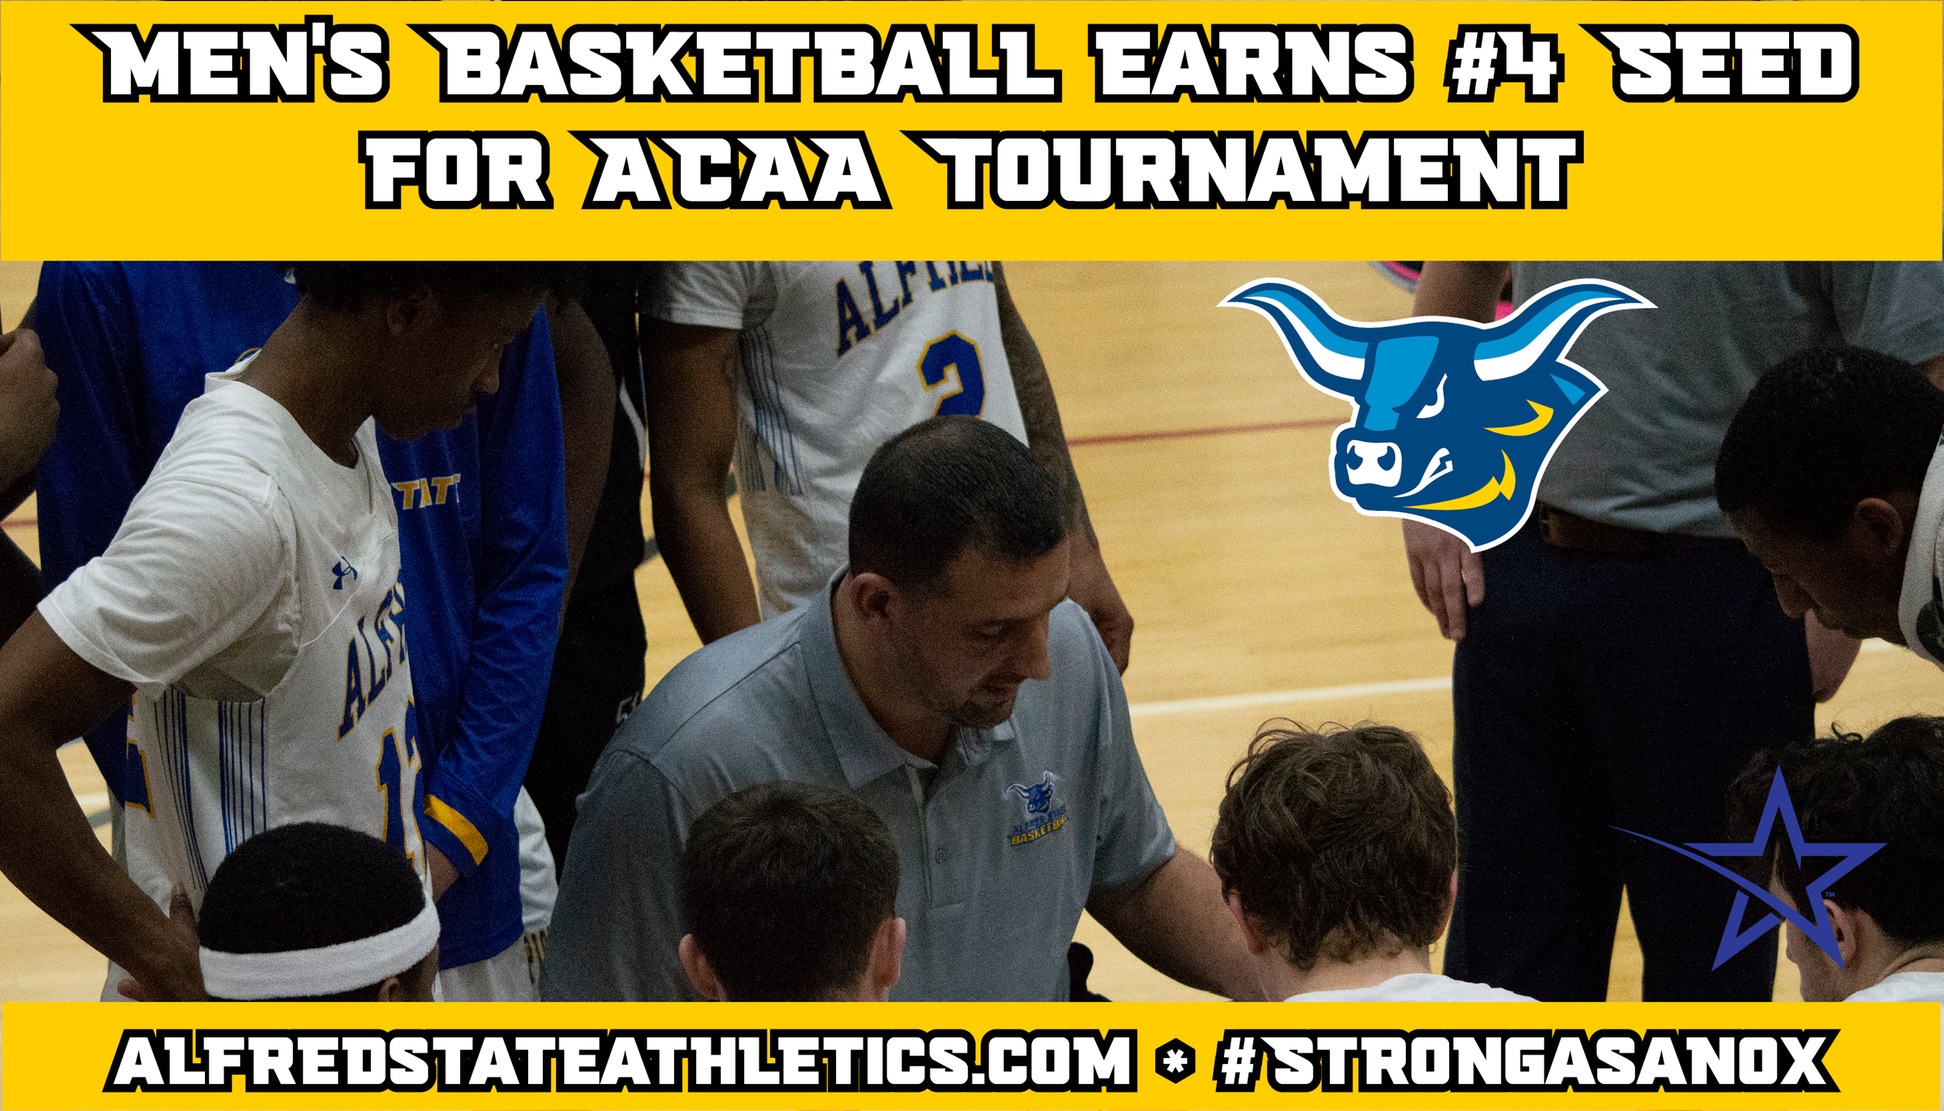 Men's Basketball team seeded 4th for ACAA Tournament